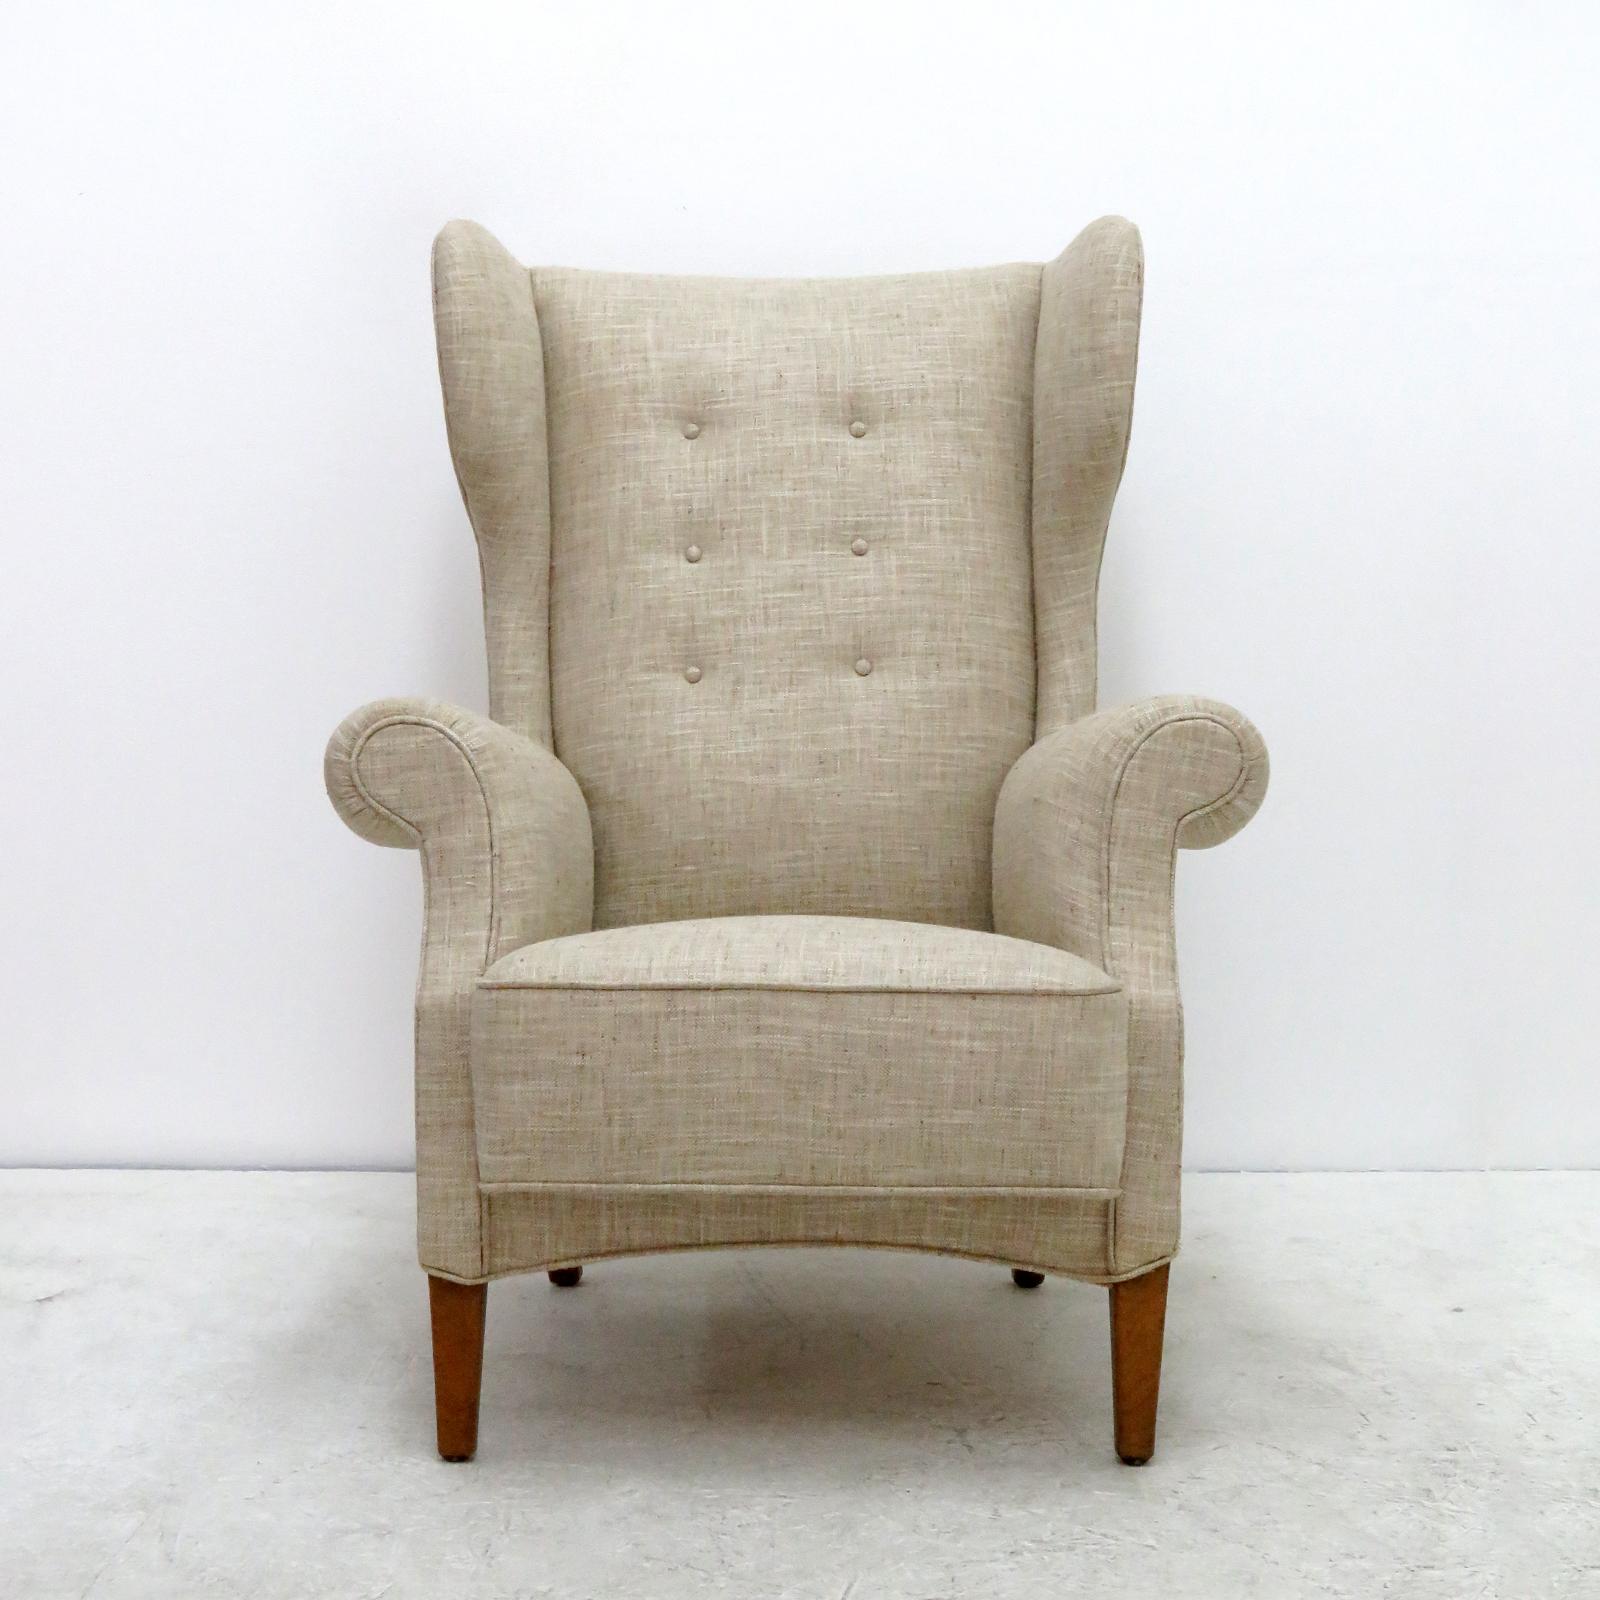 Wonderful Danish 8000 series high wingback armchair by Fritz Hansen, professionally reupholstered body on a solid wood frame with hand tied spring seat structure and button tufted back.